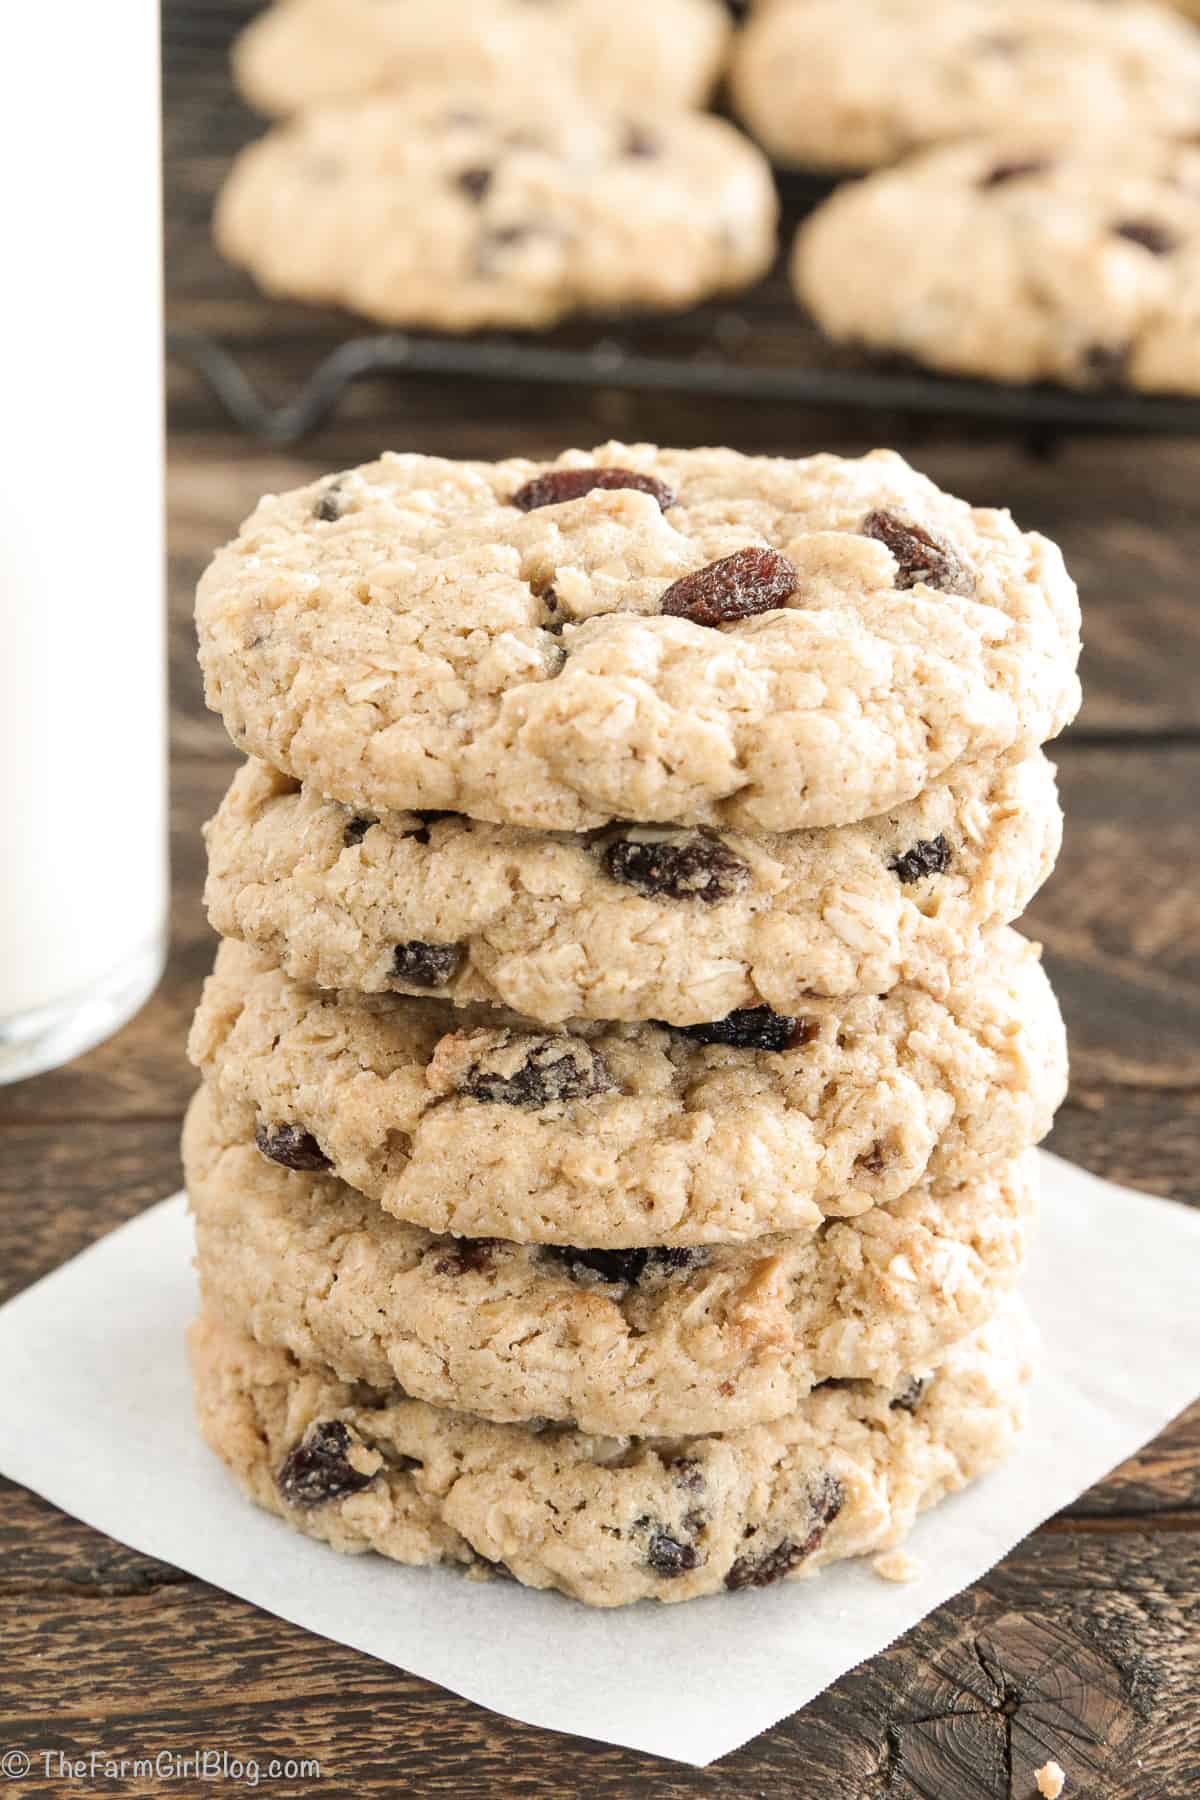 If you do not own a mixer then this recipe is for you! These Gluten-Free Oatmeal Raisin Cookies are quick and super easy to make, no mixer or chilling time is needed.